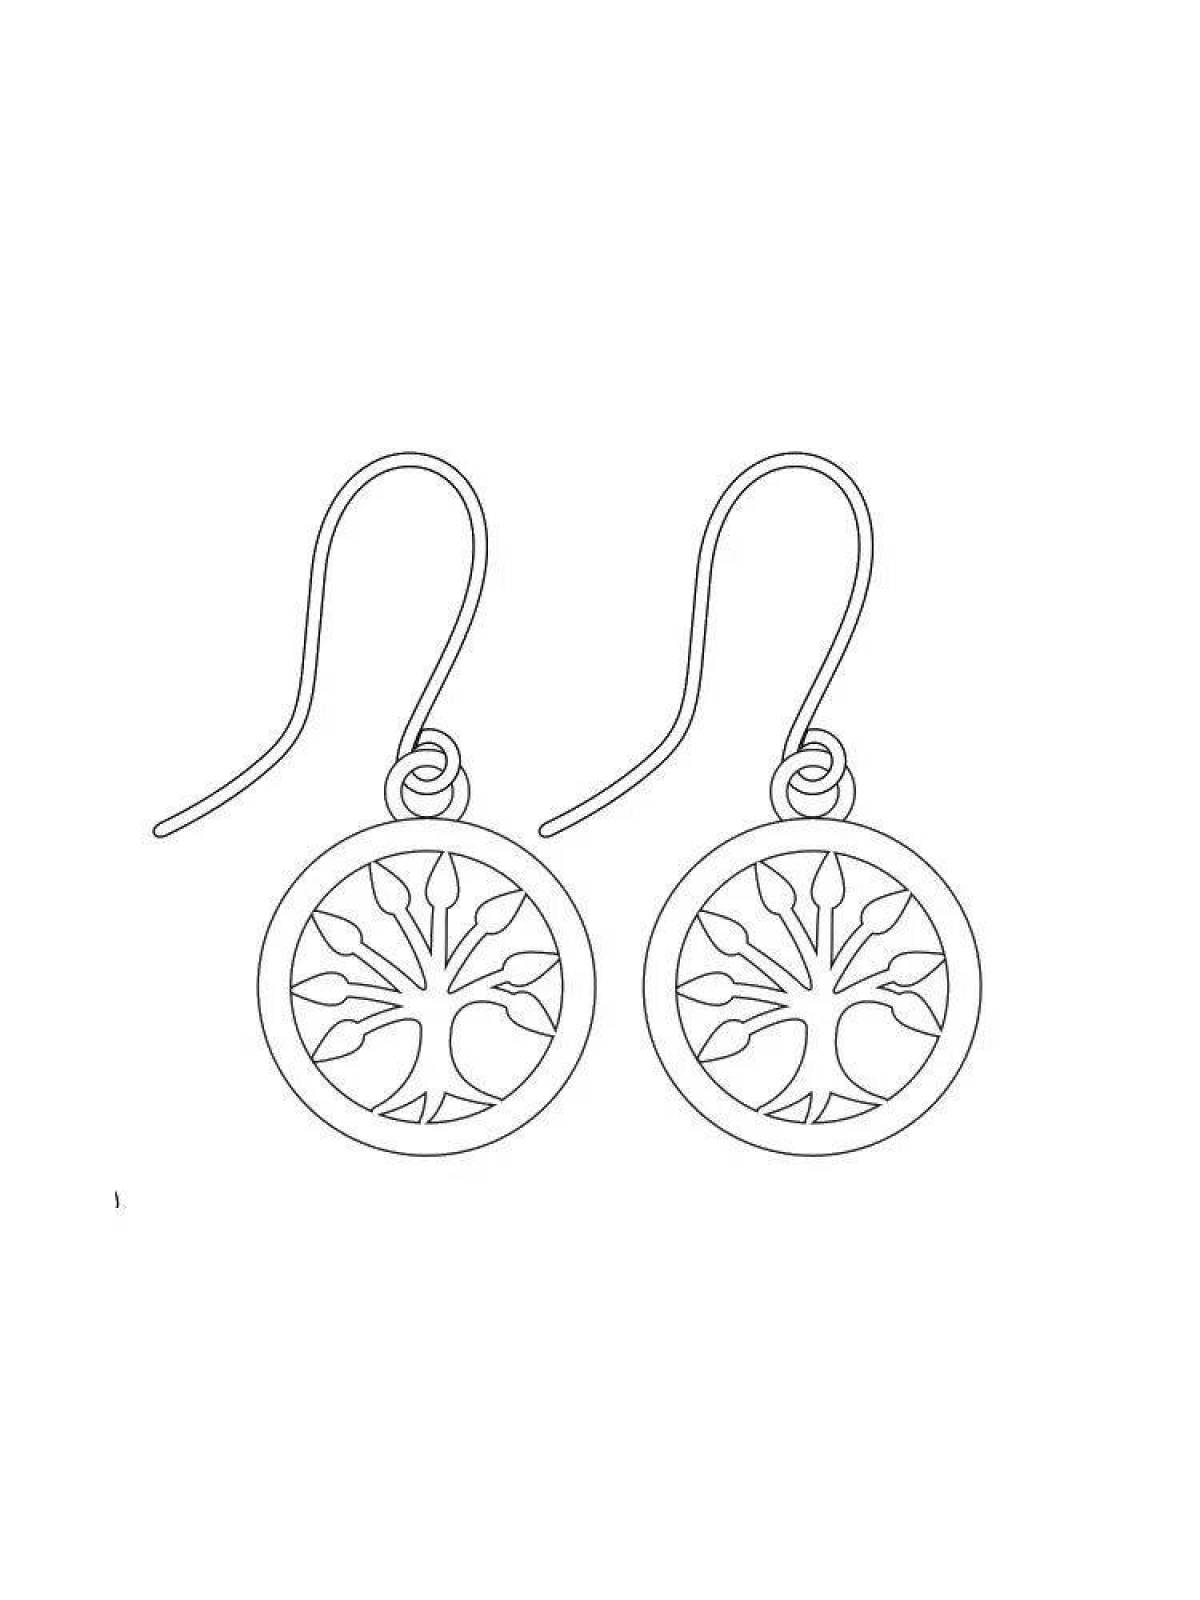 Colourful earrings coloring page